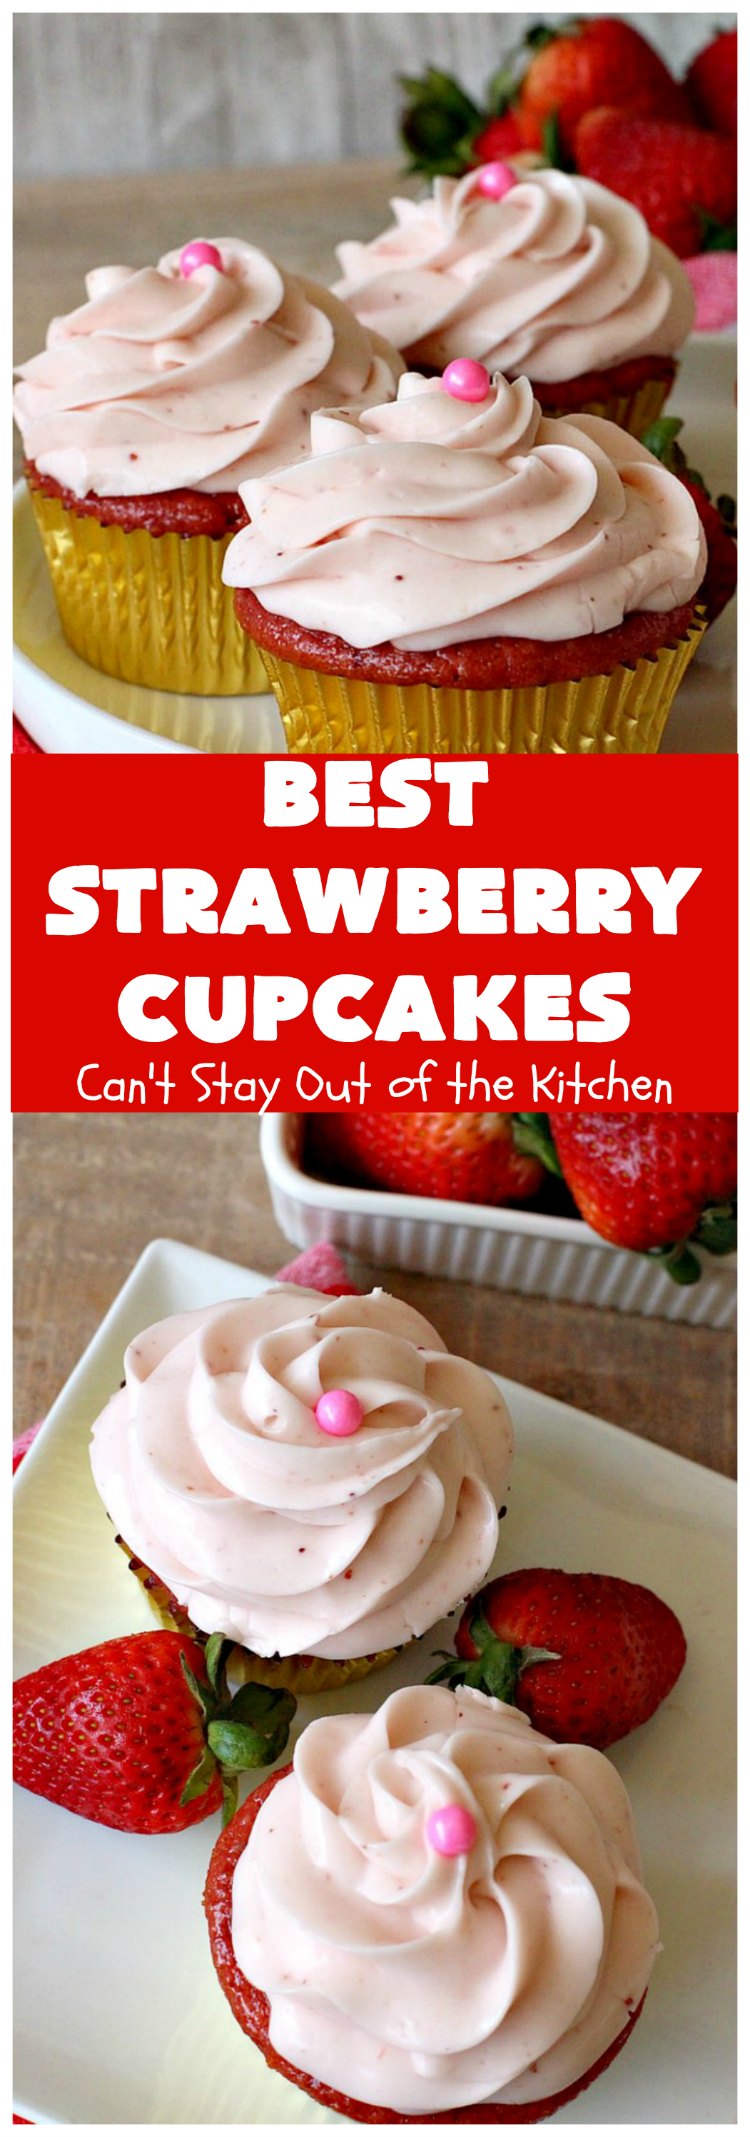 Best Strawberry Cupcakes | Can't Stay Out of the Kitchen